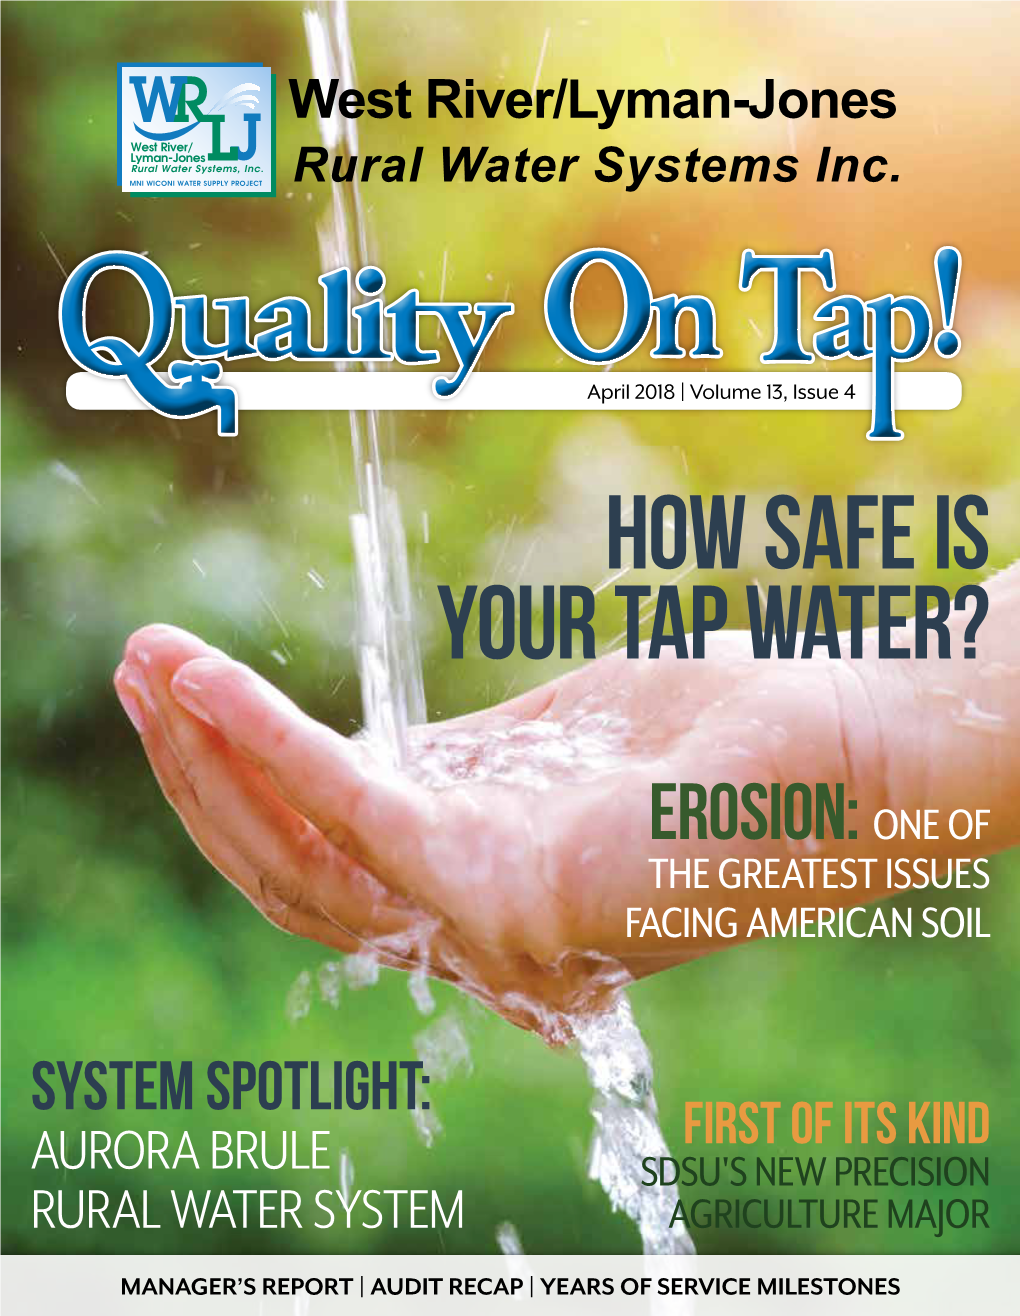 How Safe Is Your Tap Water?